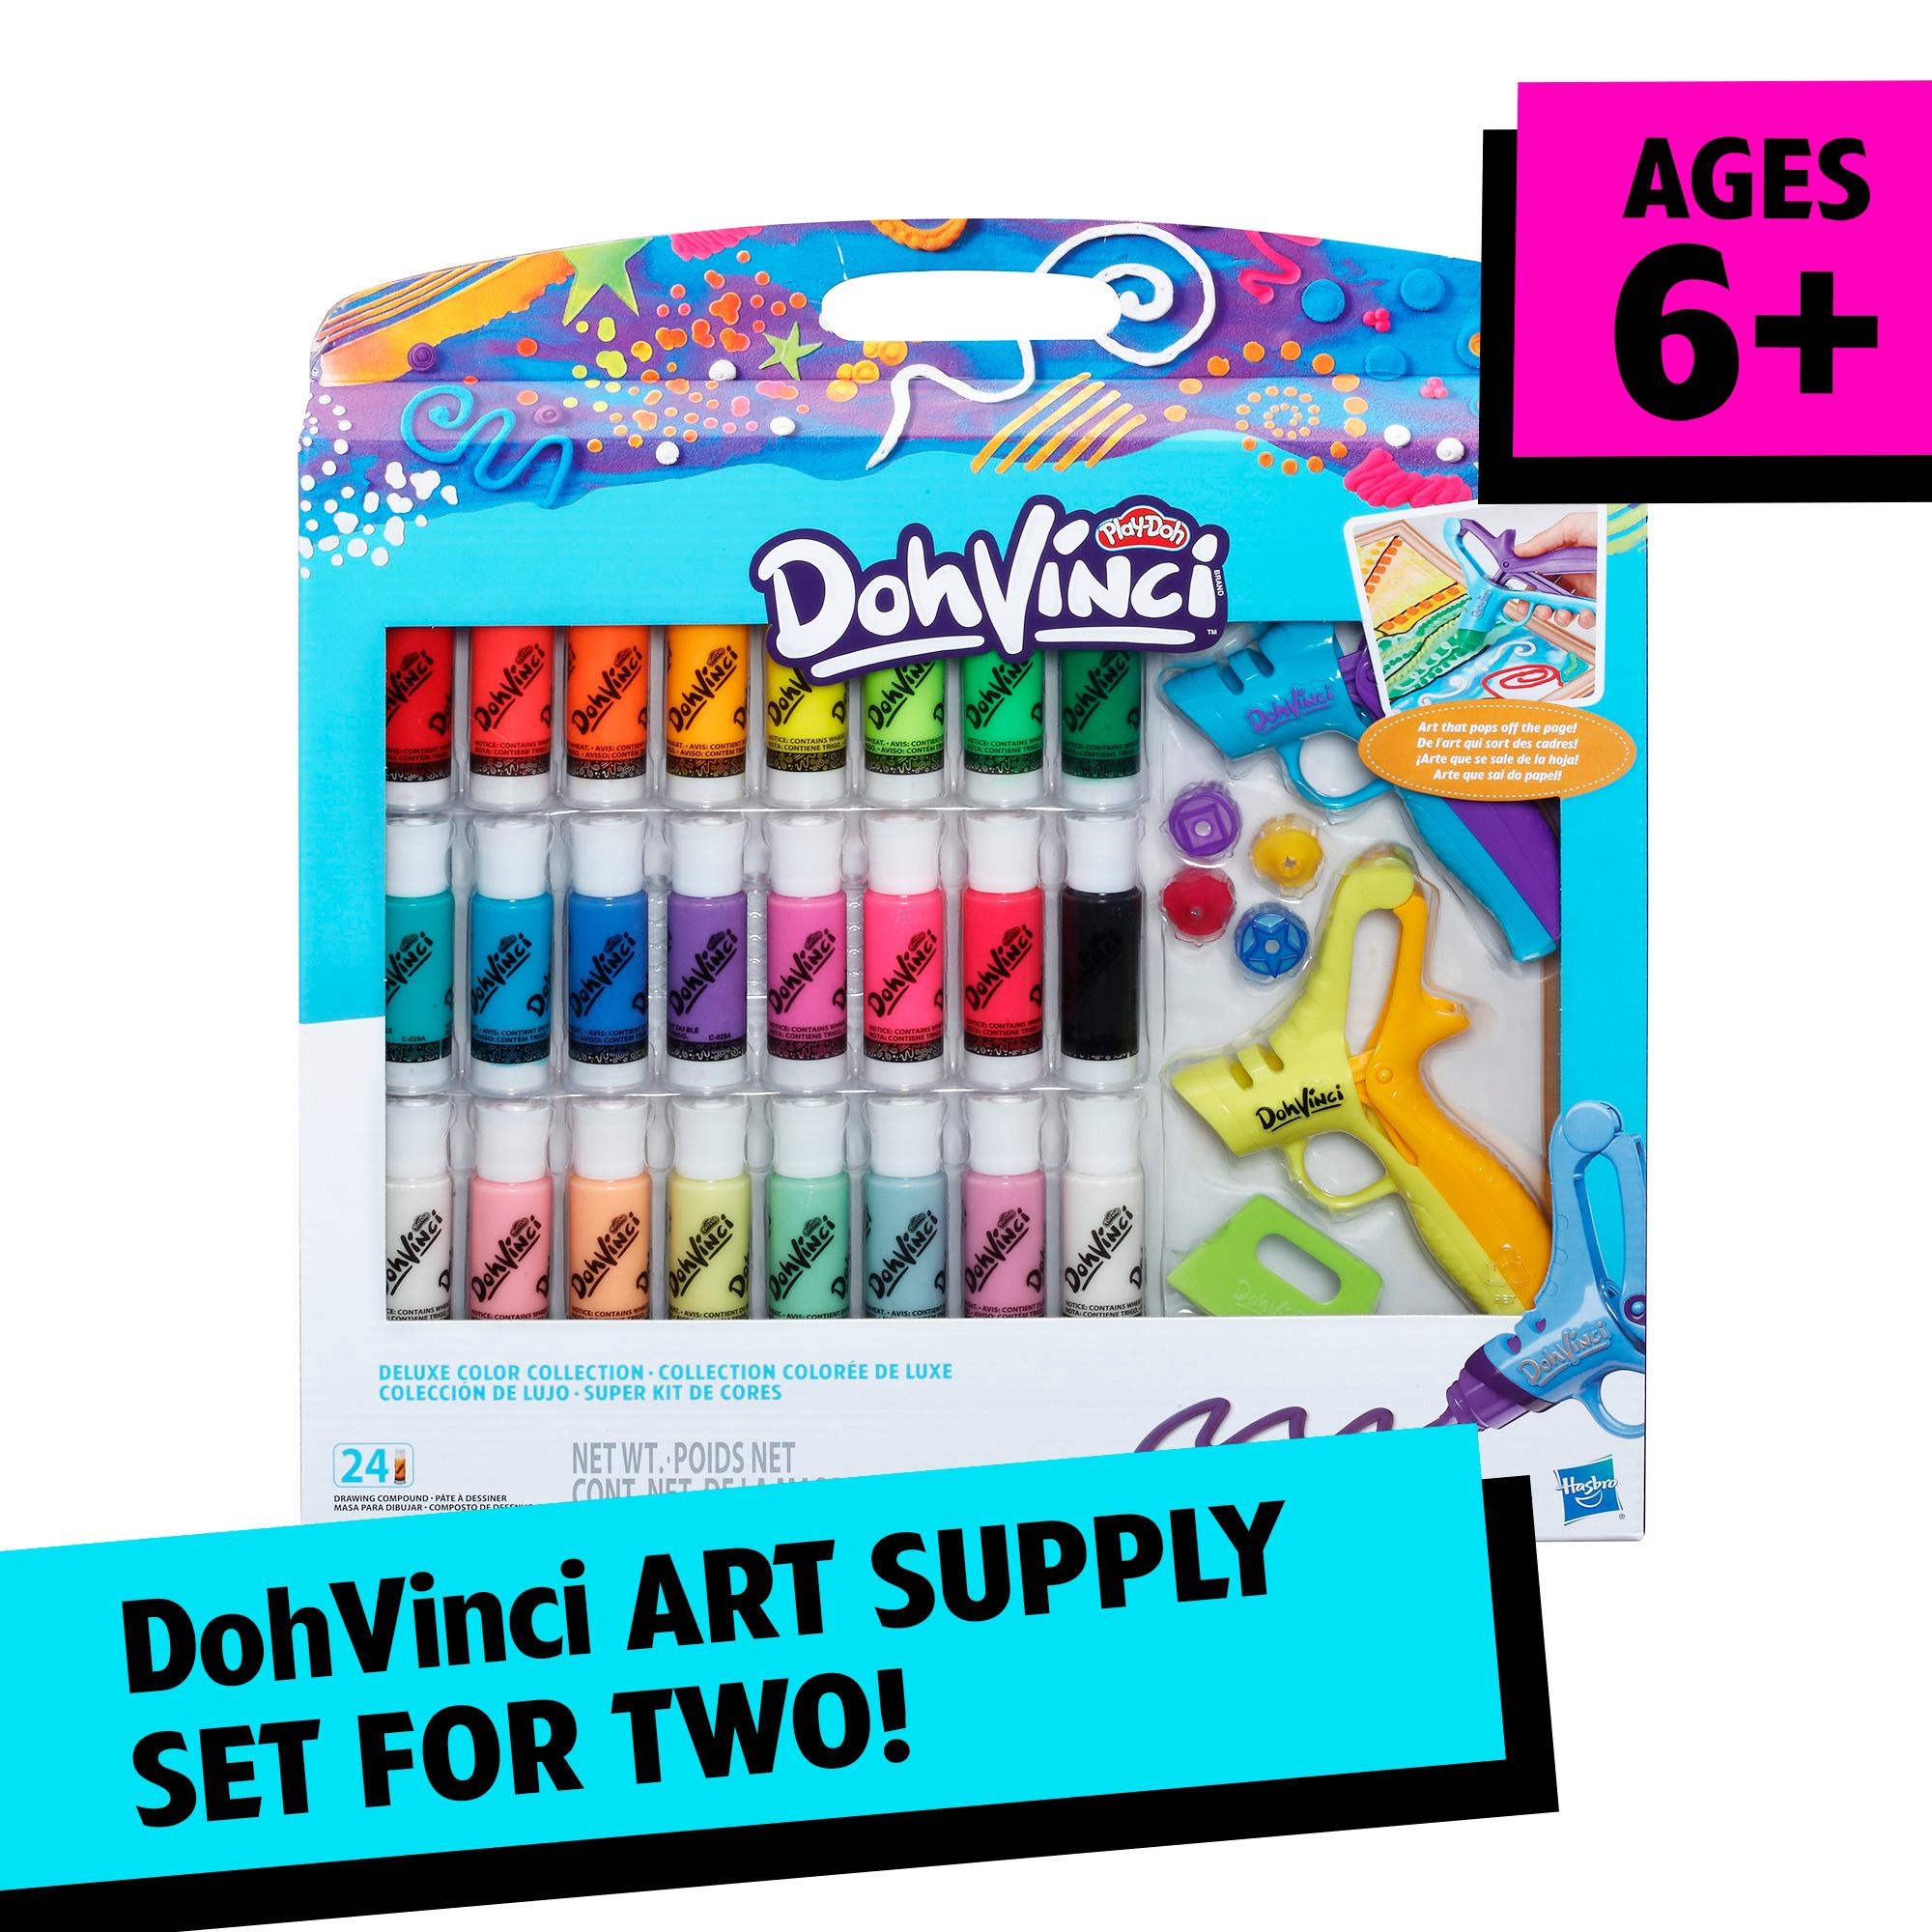 DohVinci Deluxe Color Collection Art Set by Play-Doh BRAND for sale online 